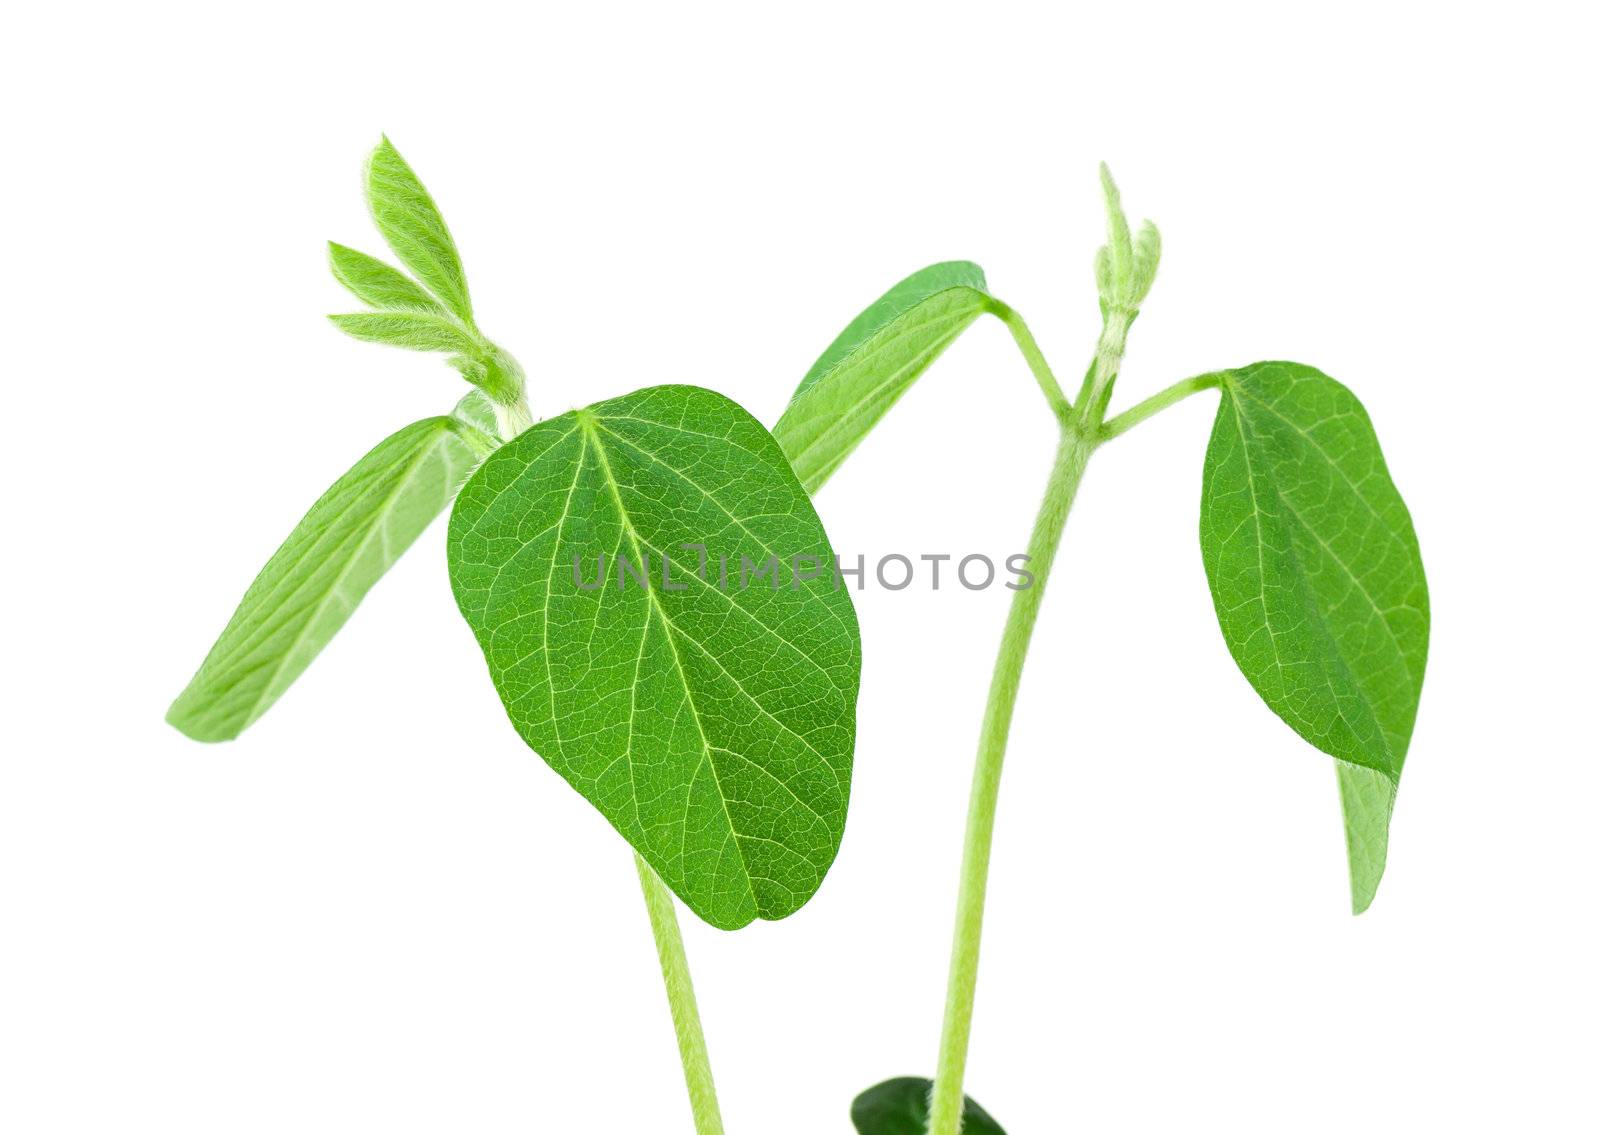 Two soy plants isolated on white background